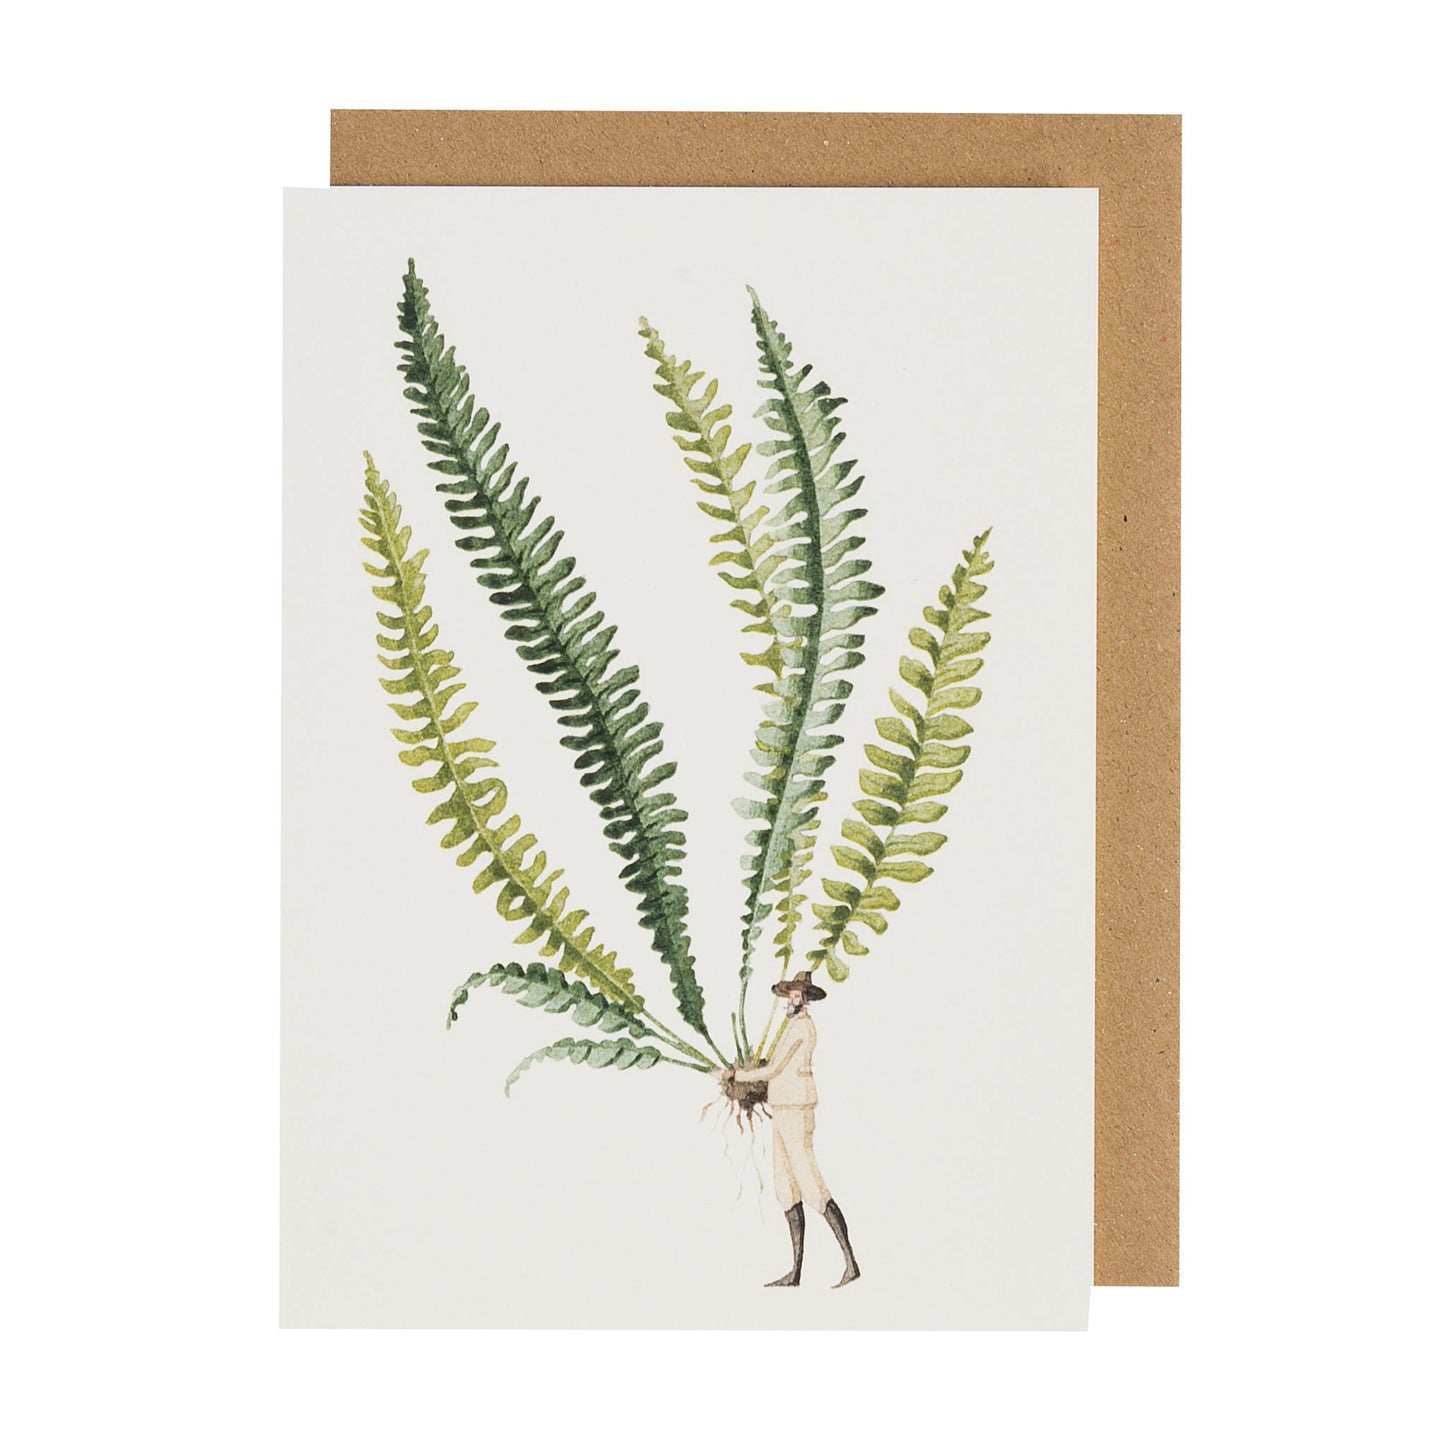 environmentally sustainable paper, compostable packaging, recycled paper, made in england, illustration, ferns